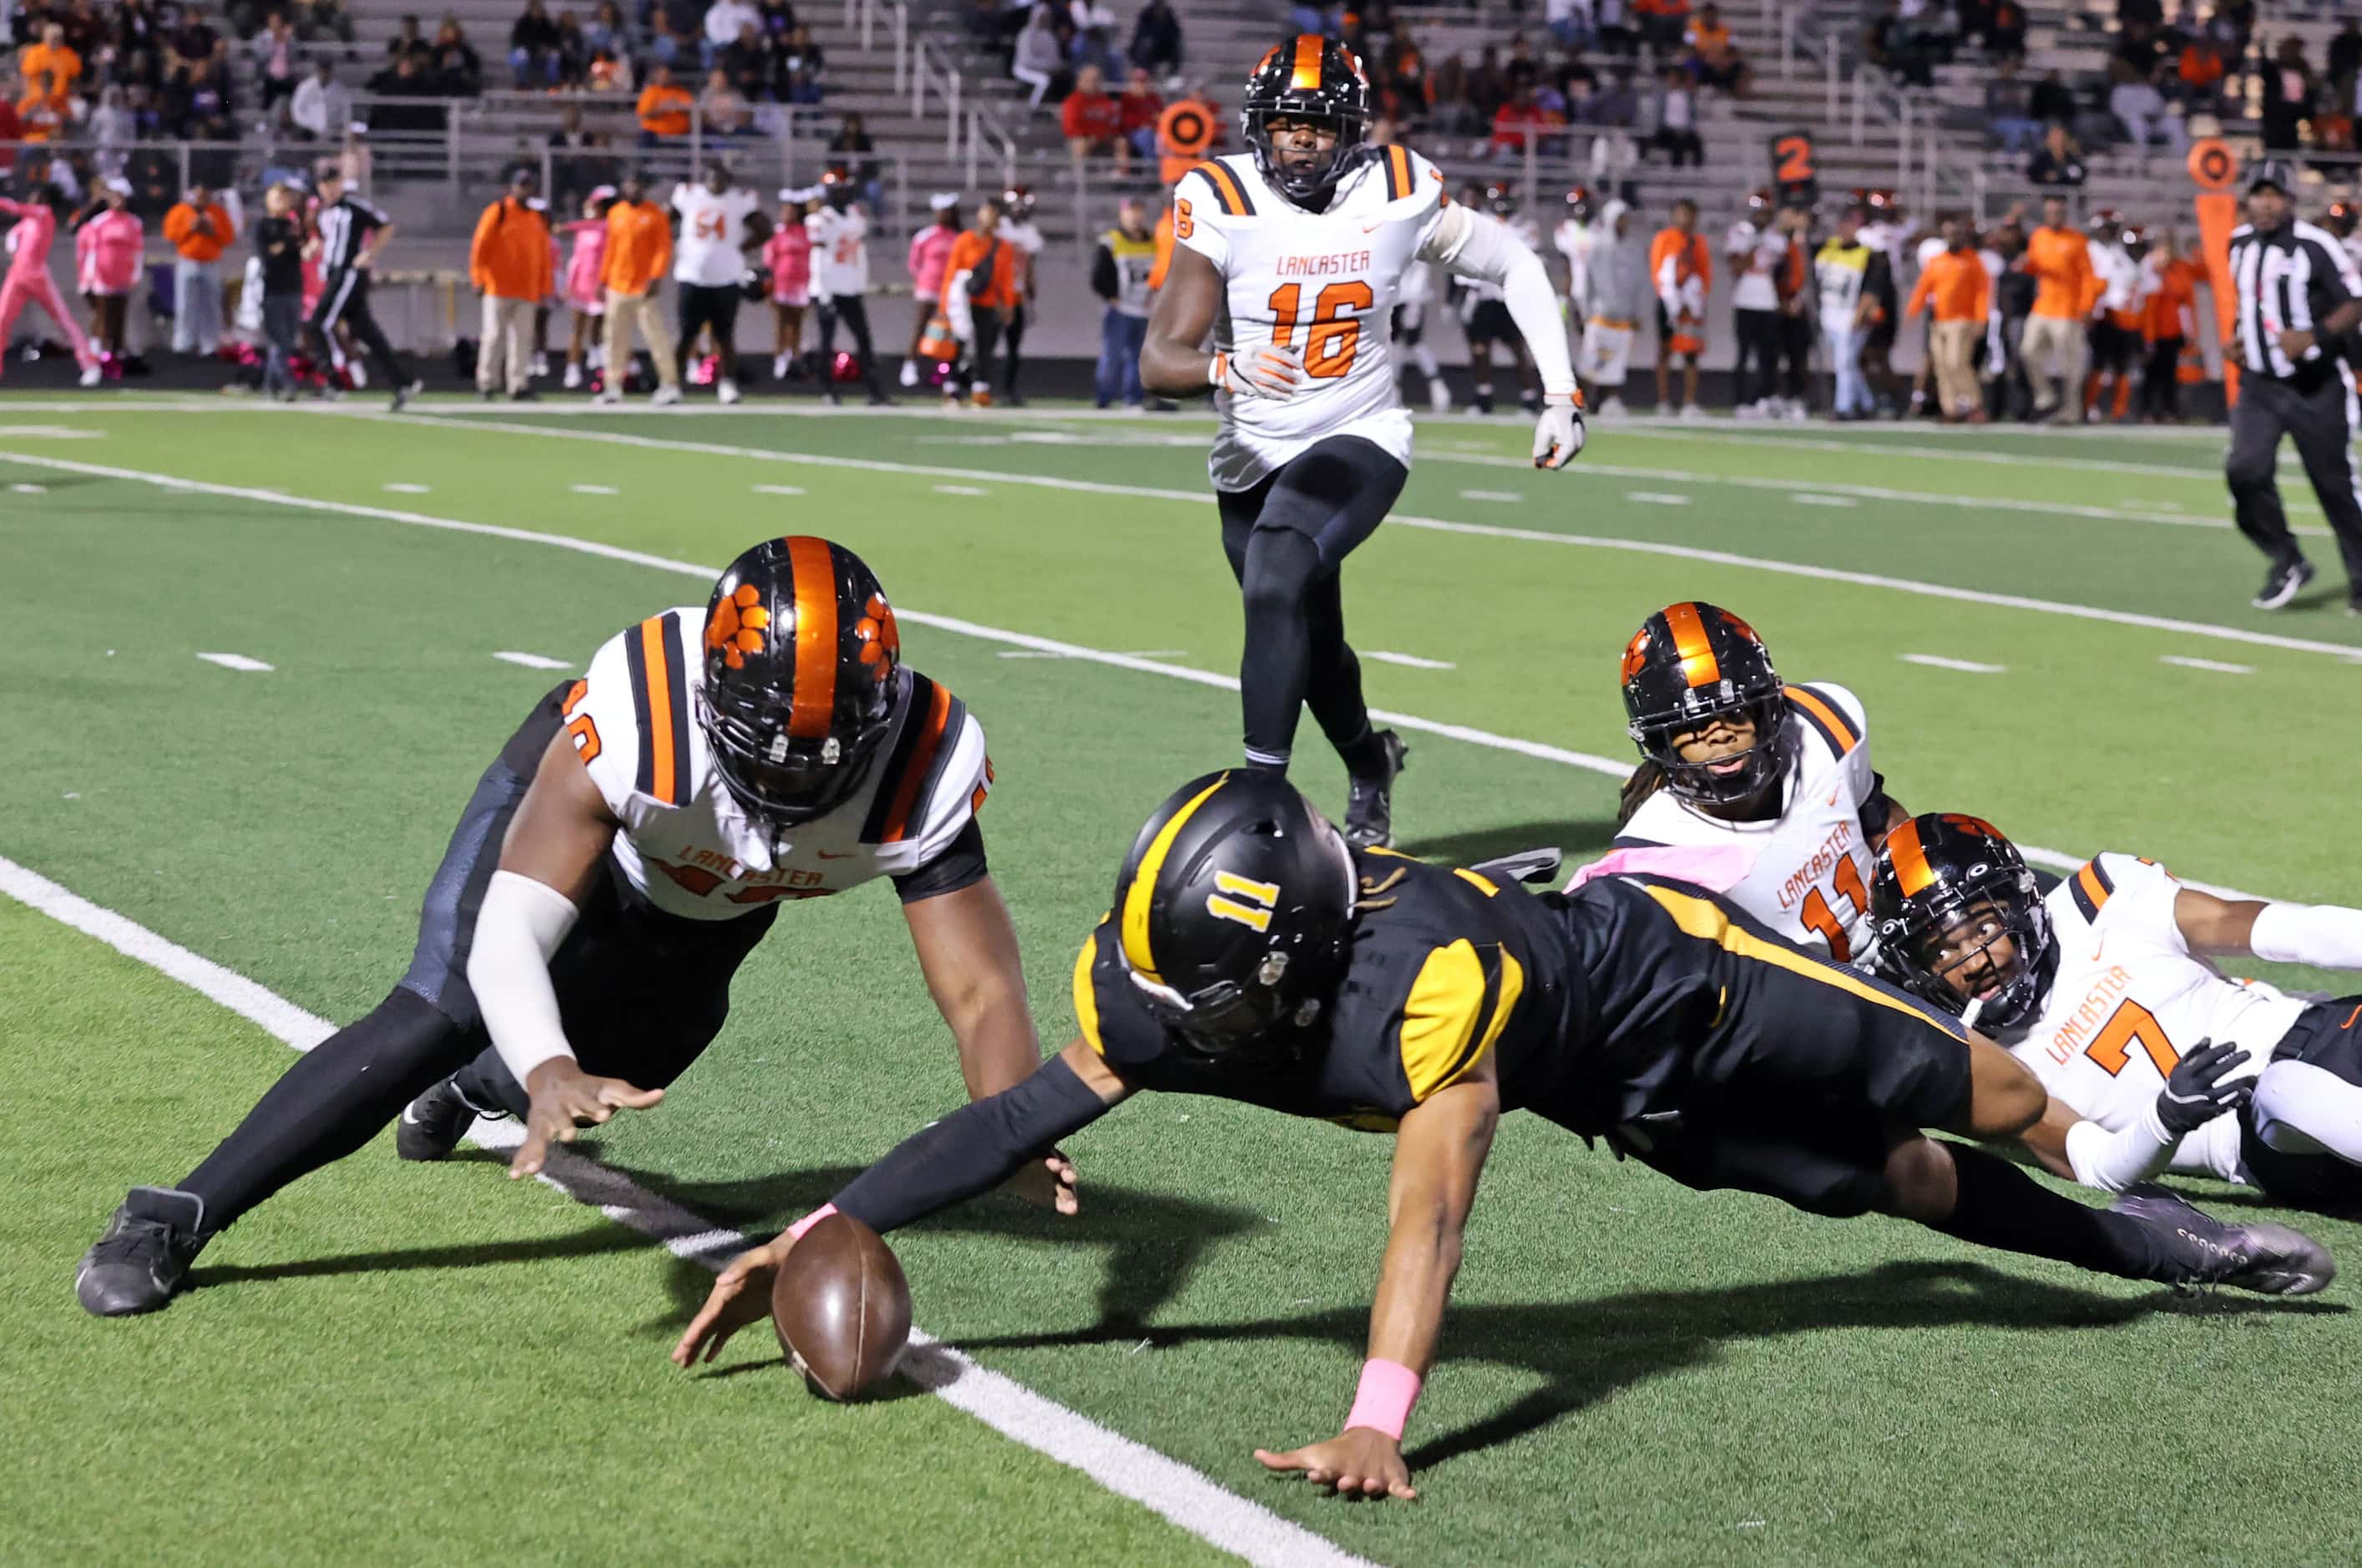 Forney high’s Orin Gee (11) fumbles the football, as Lancaster’s Jakobe Williams (40) tries...